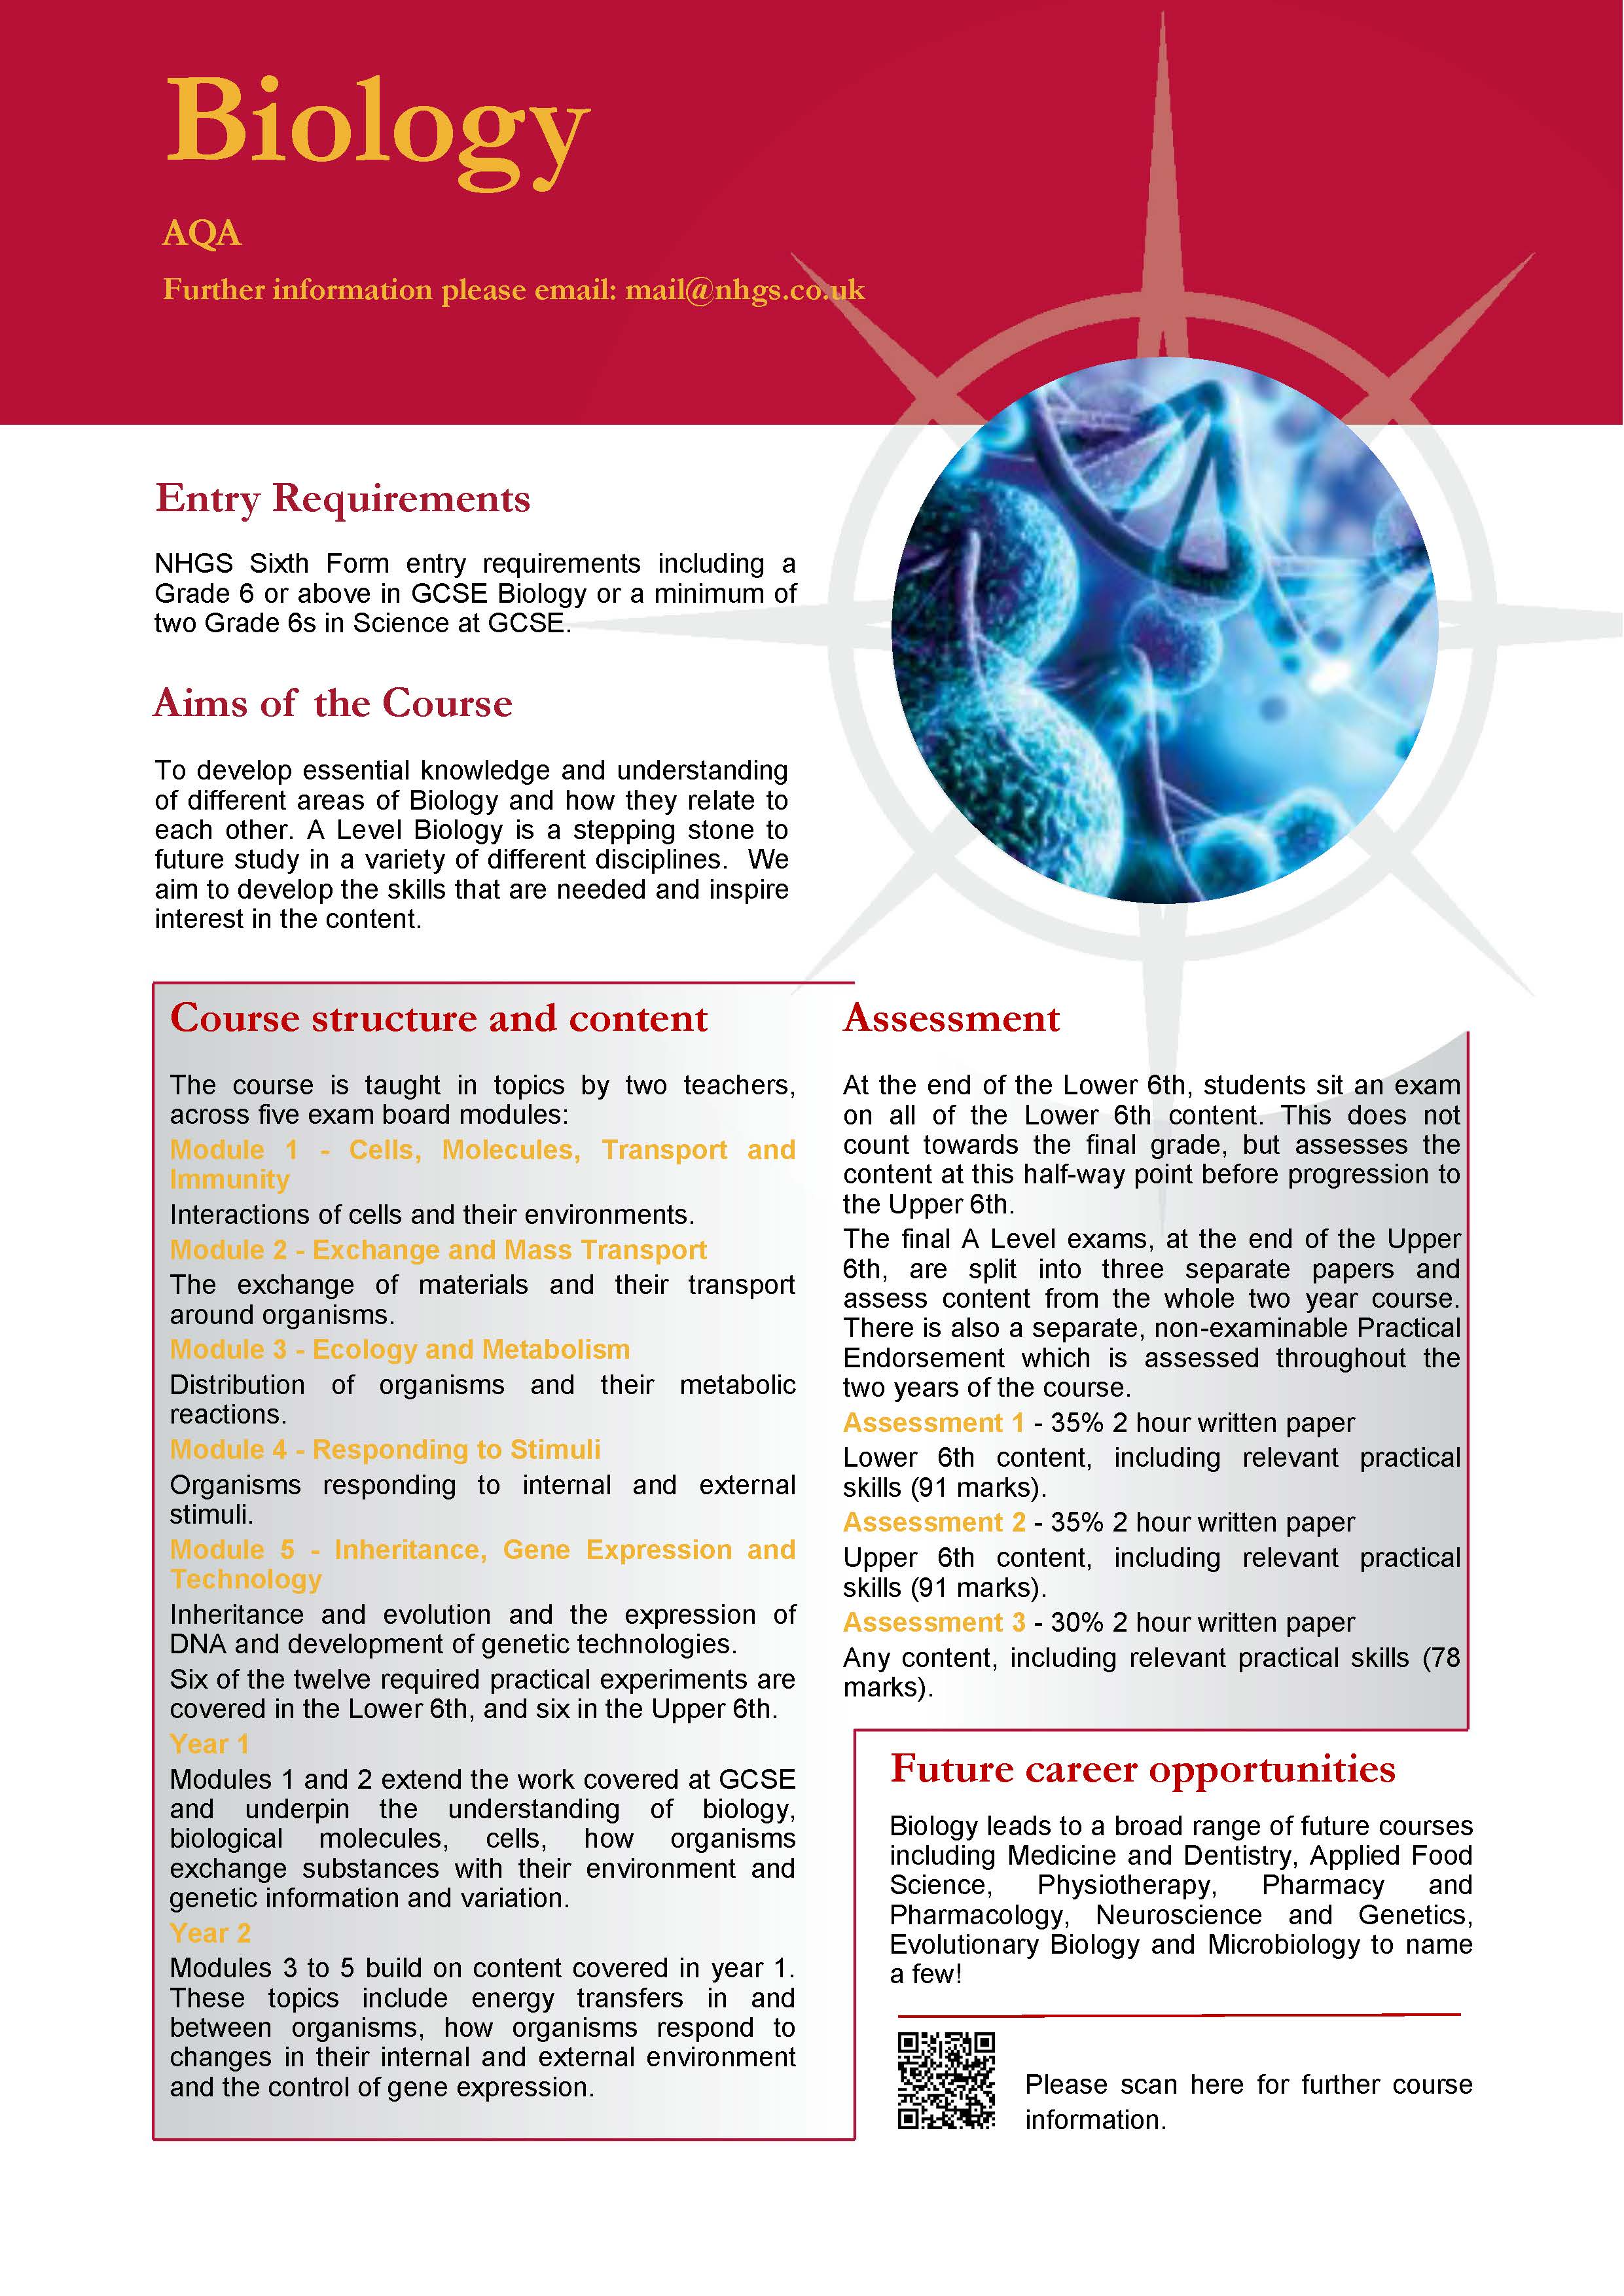 Biology A Level Course Flyer, NHGS Sixth Form